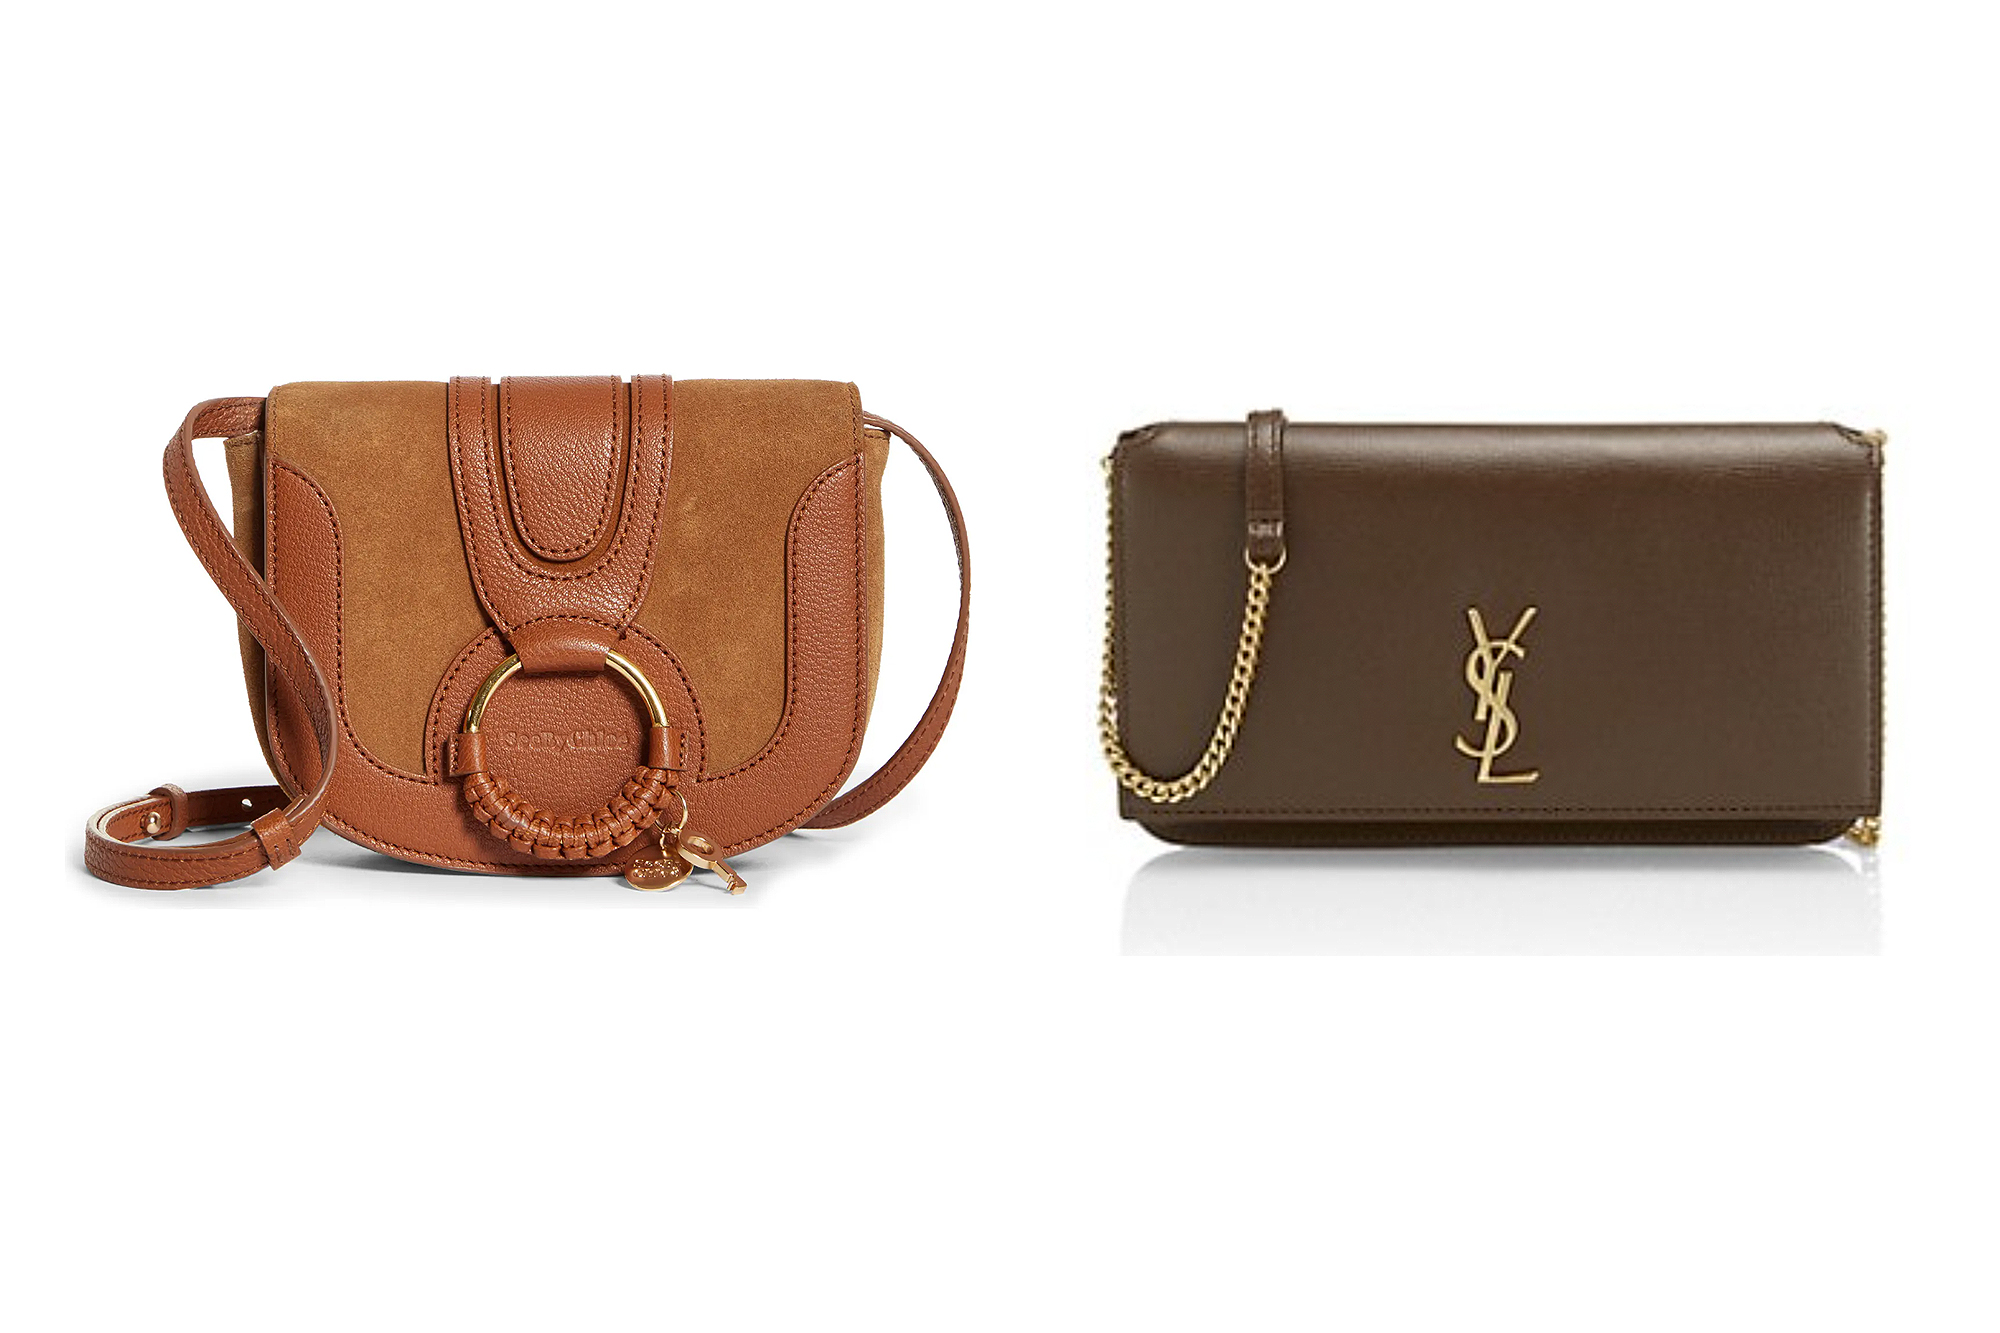 Are cross body bags also hand bags? - Quora